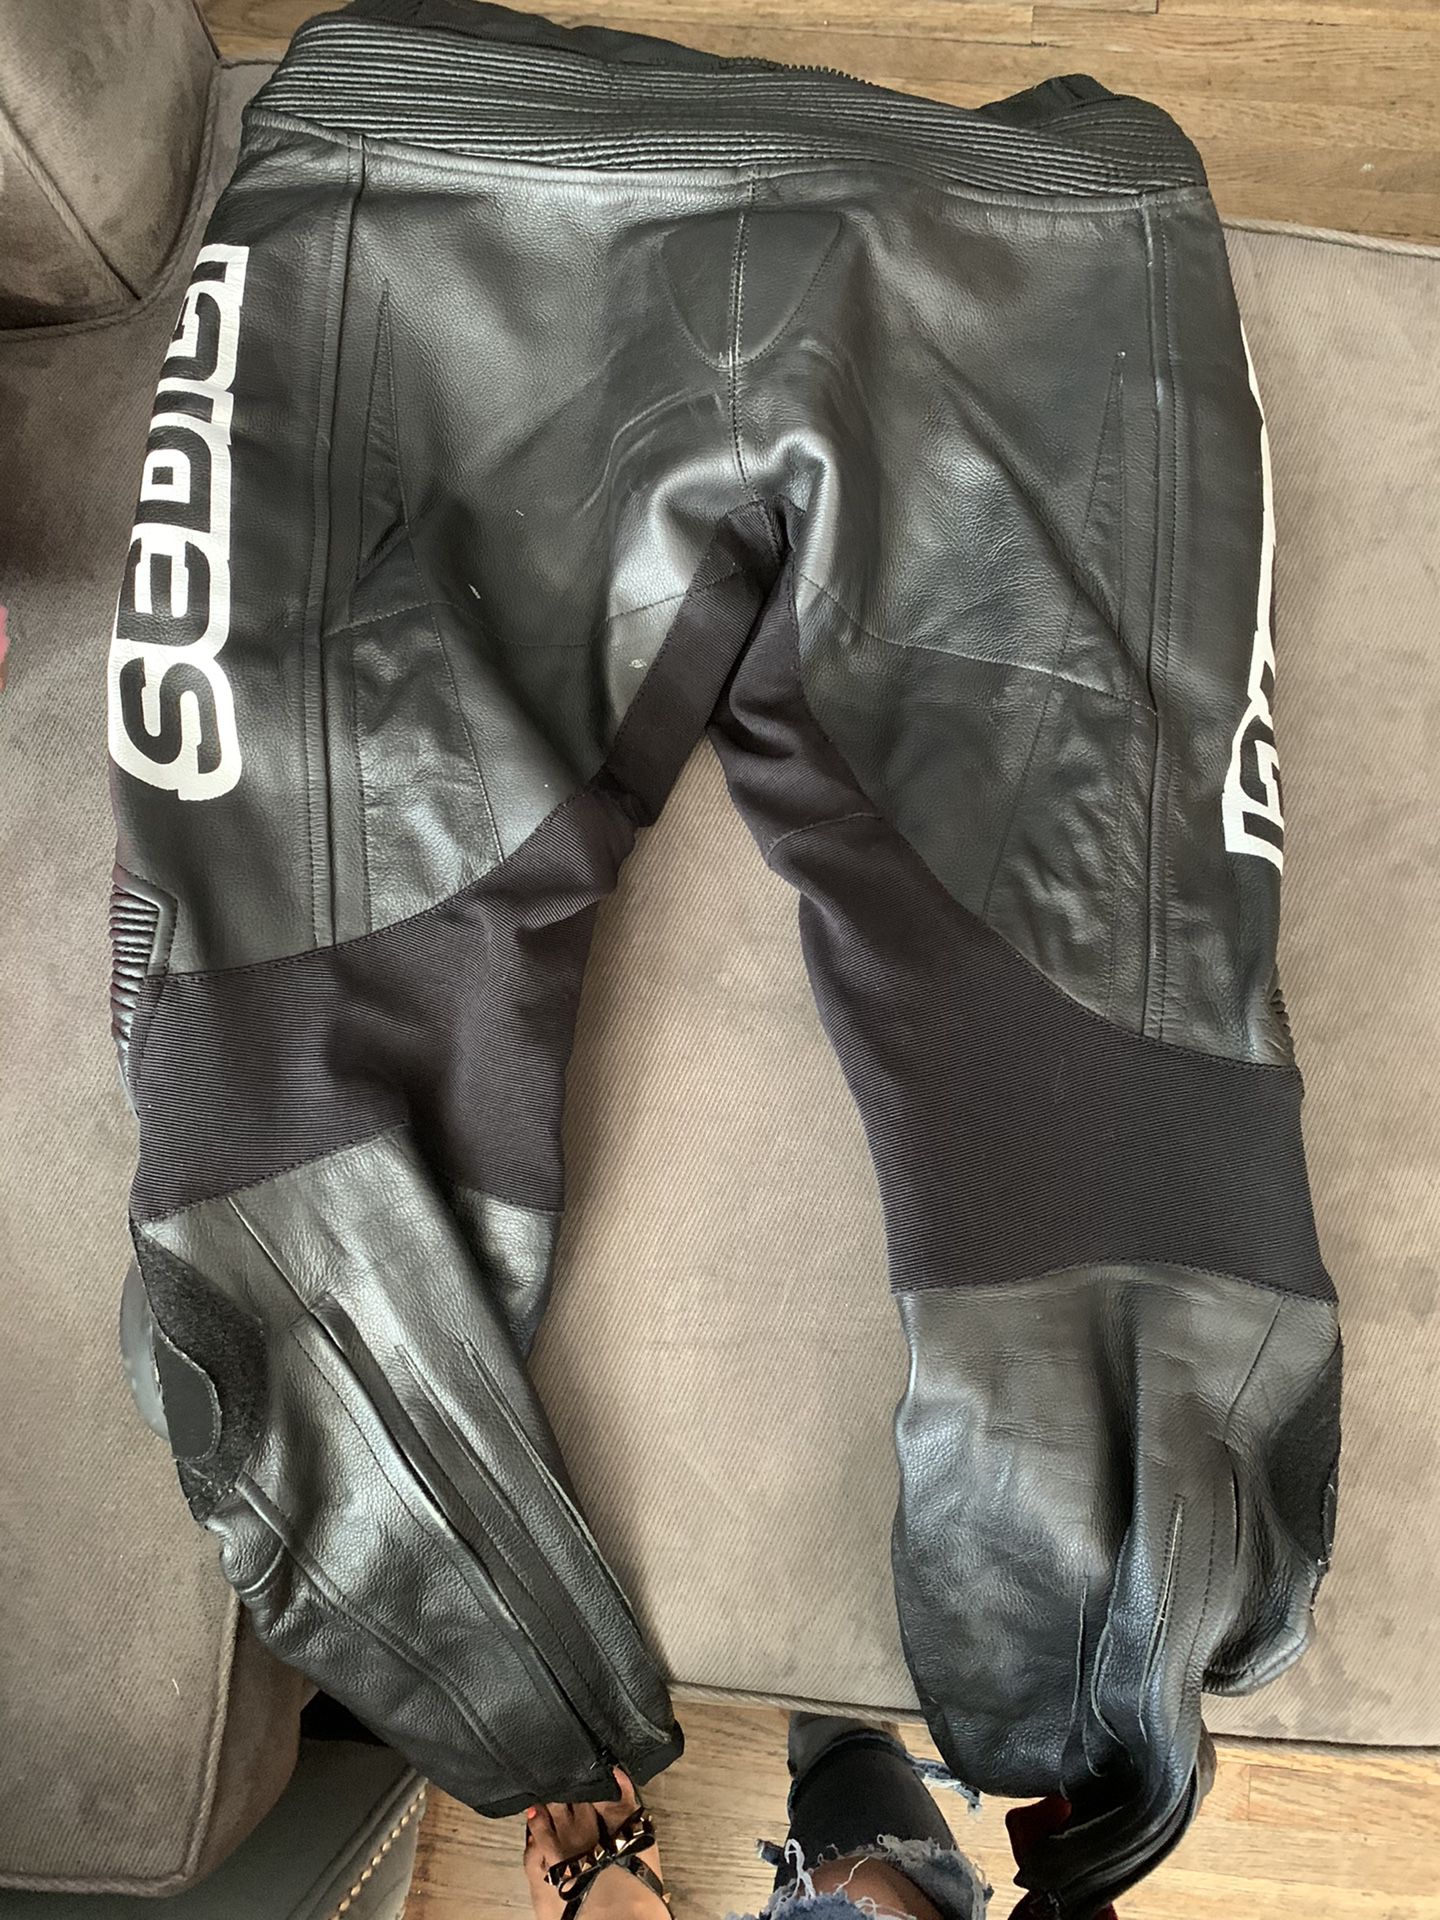 Sedici #16 leather pants with padding. Motorcycle gear